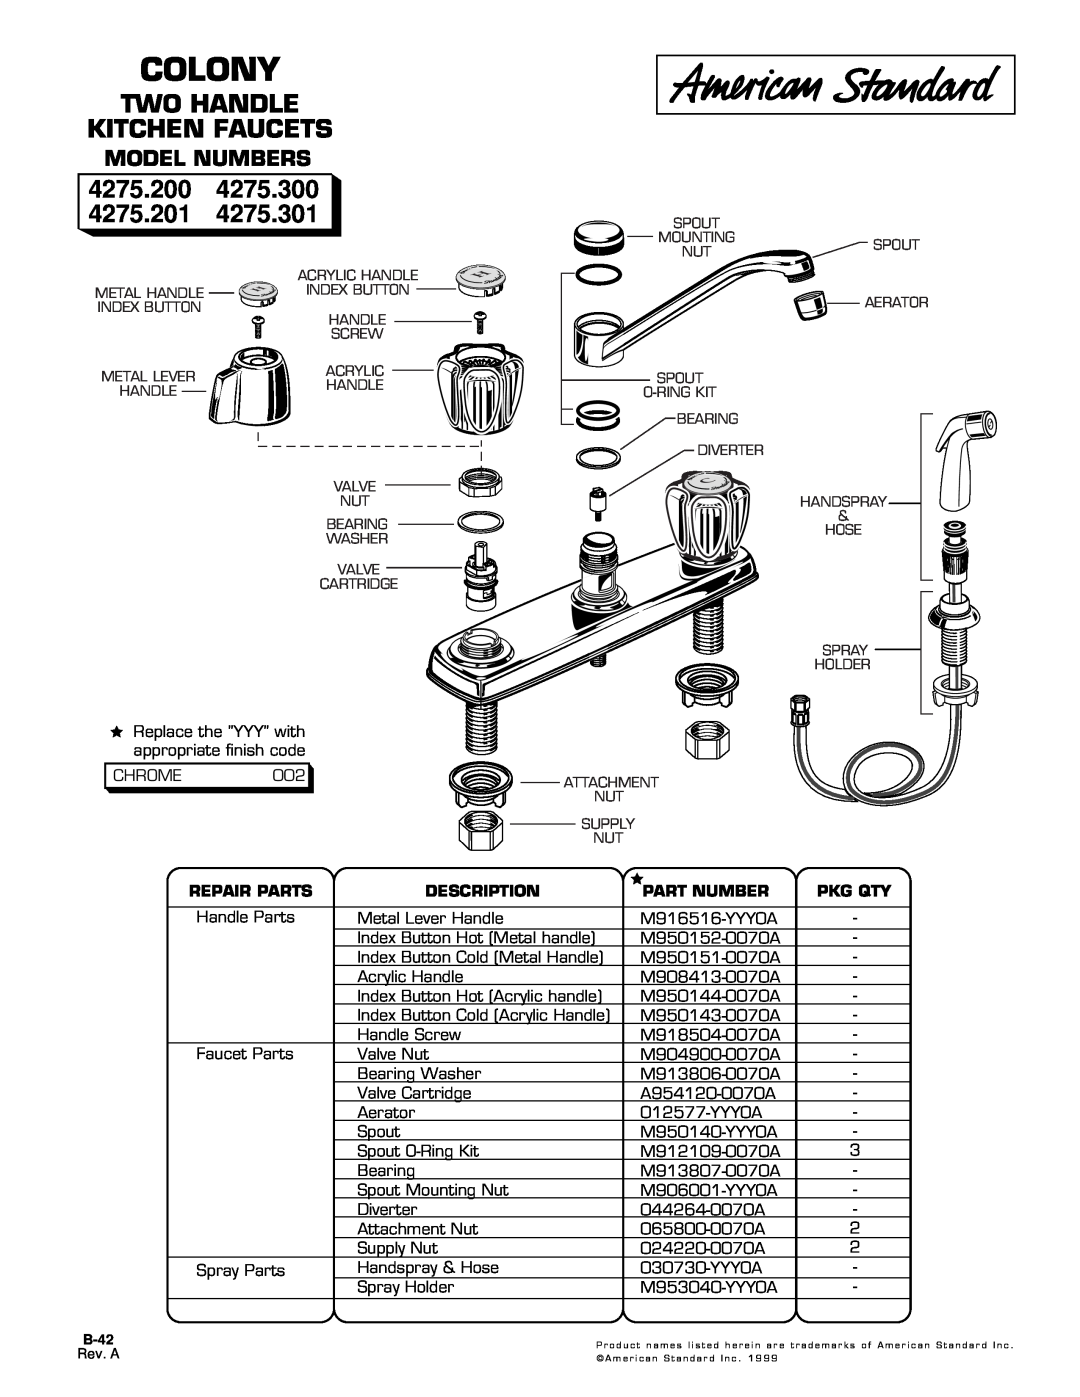 American Standard M916516-YYY0A manual Colony, Two Handle Kitchen Faucets, 4275.200, Model Numbers, Repair Parts, Pkg Qty 